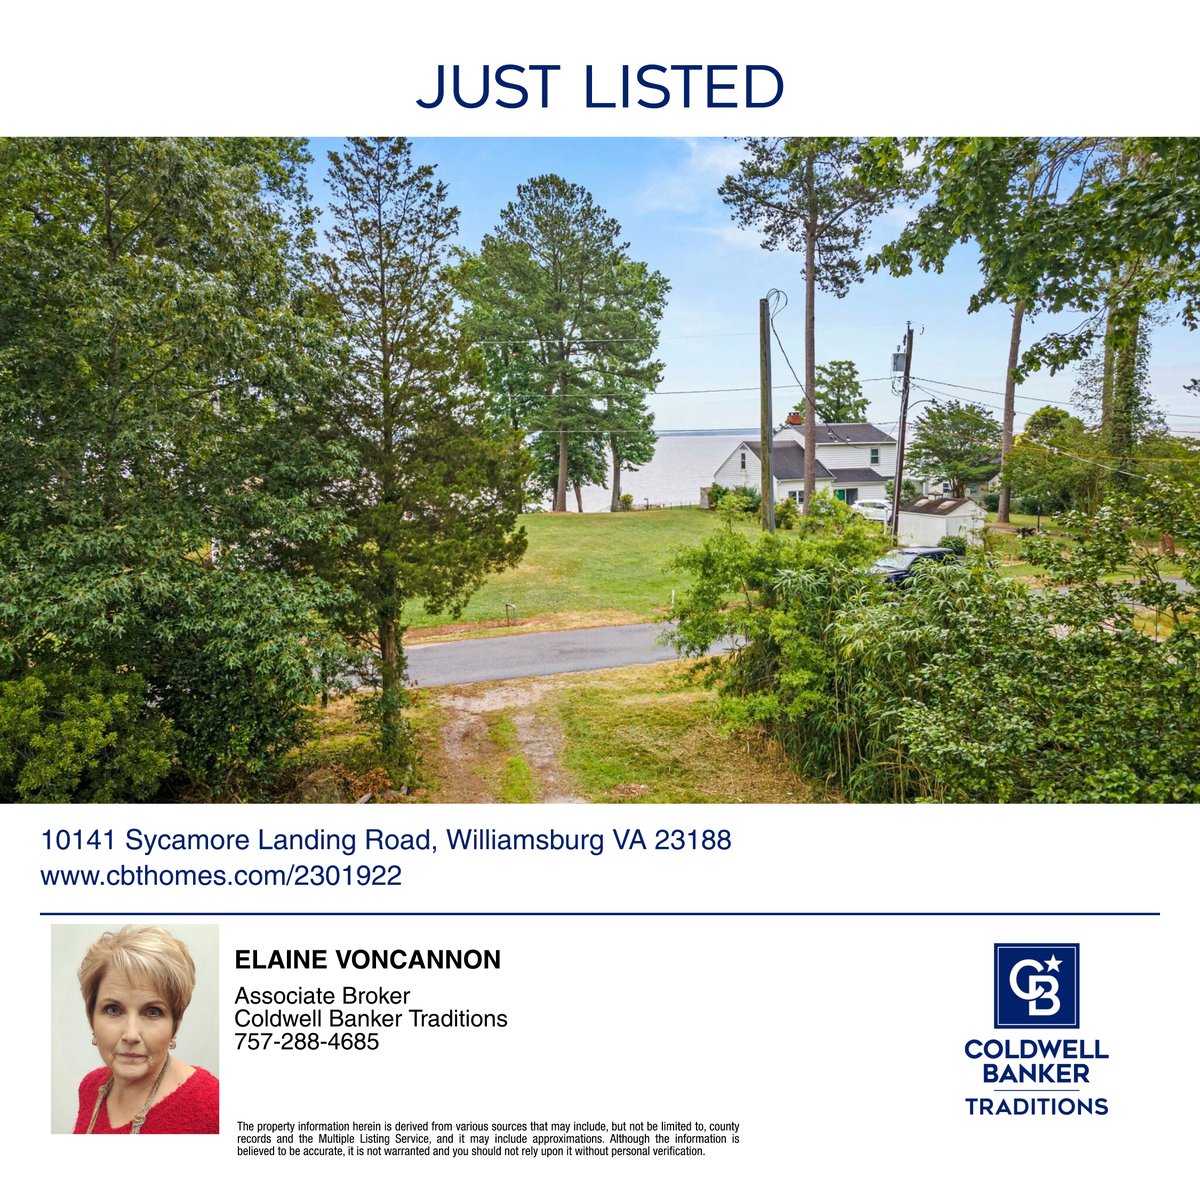 Elaine VonCannon Living in Williamsburg with Coldwell Banker Traditions, JUST LISTED this Waterfront Retreat on the York River in Williamsburg, VA. If this interests you, call Elaine today!
#justlisted #coldwellbanker